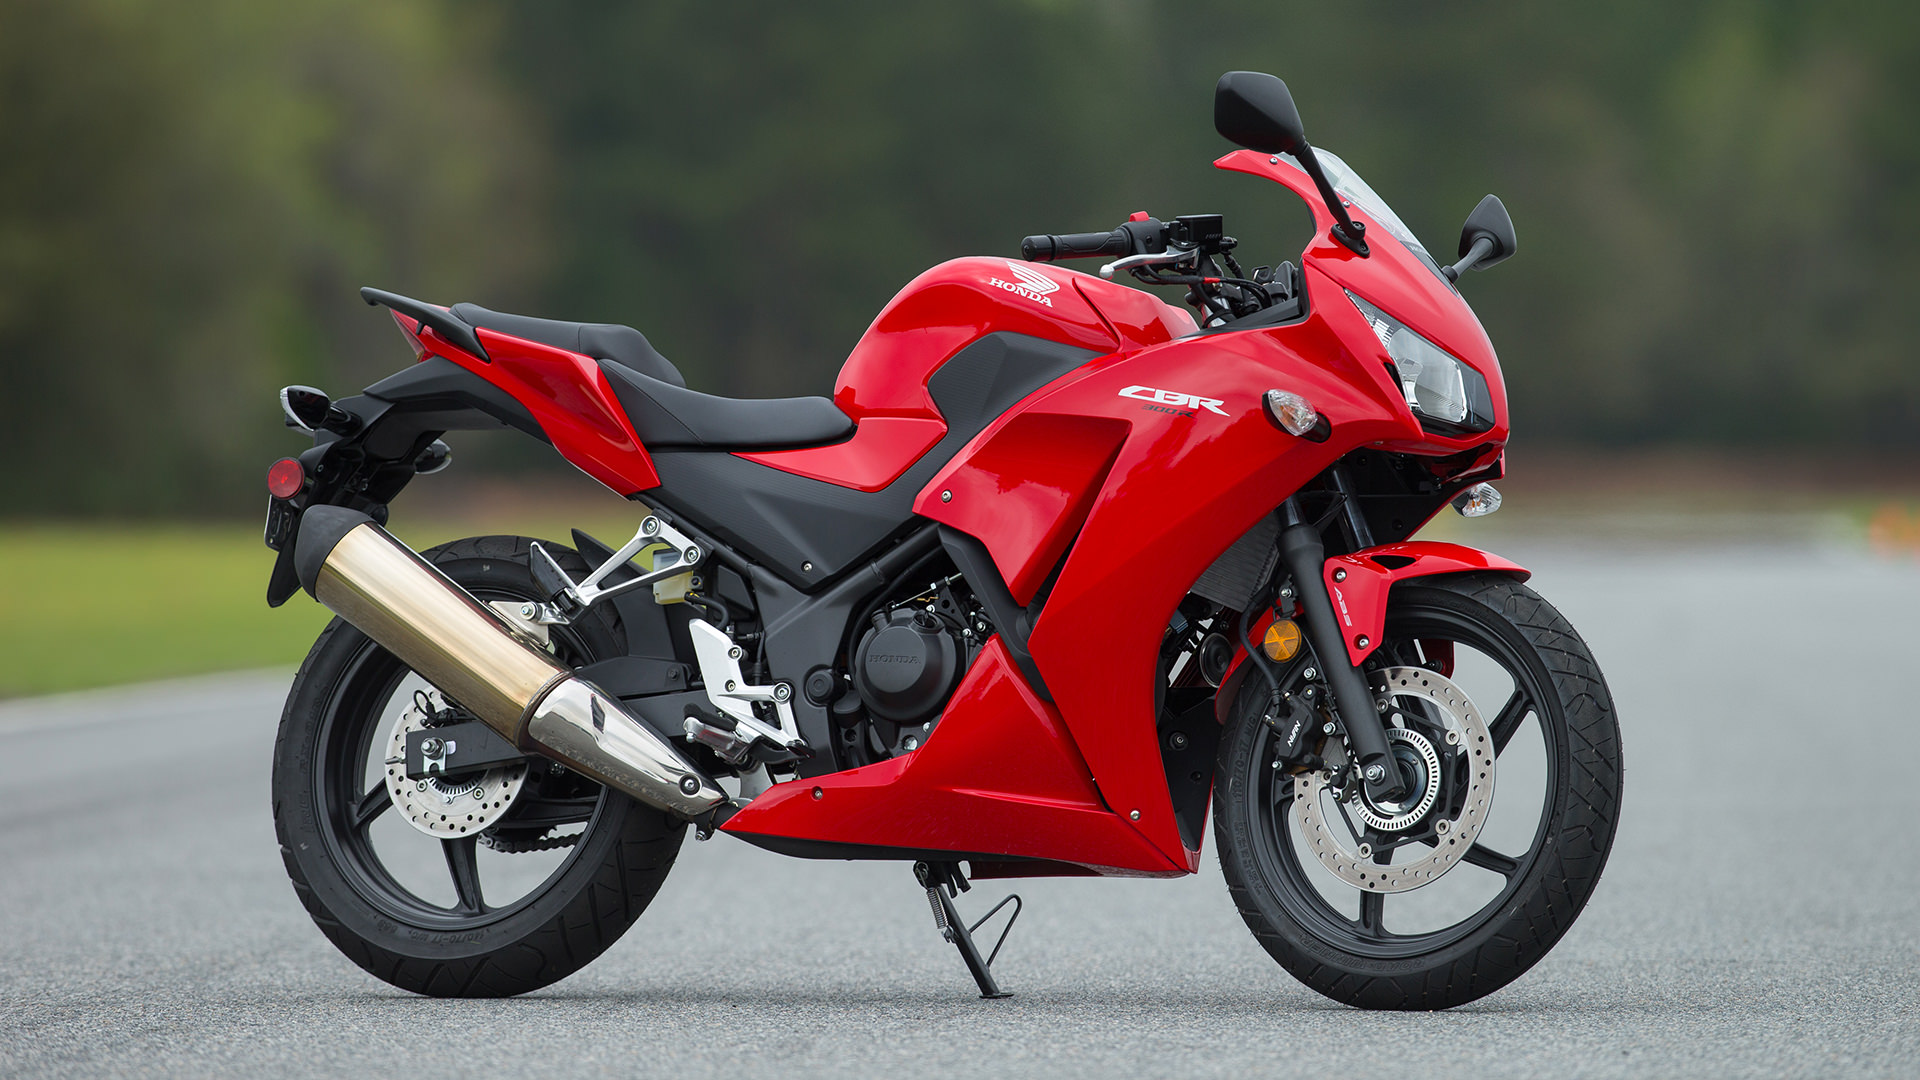 2015 Honda Cbr300r Abs Review Specs Pictures Videos Honda Pro Kevin